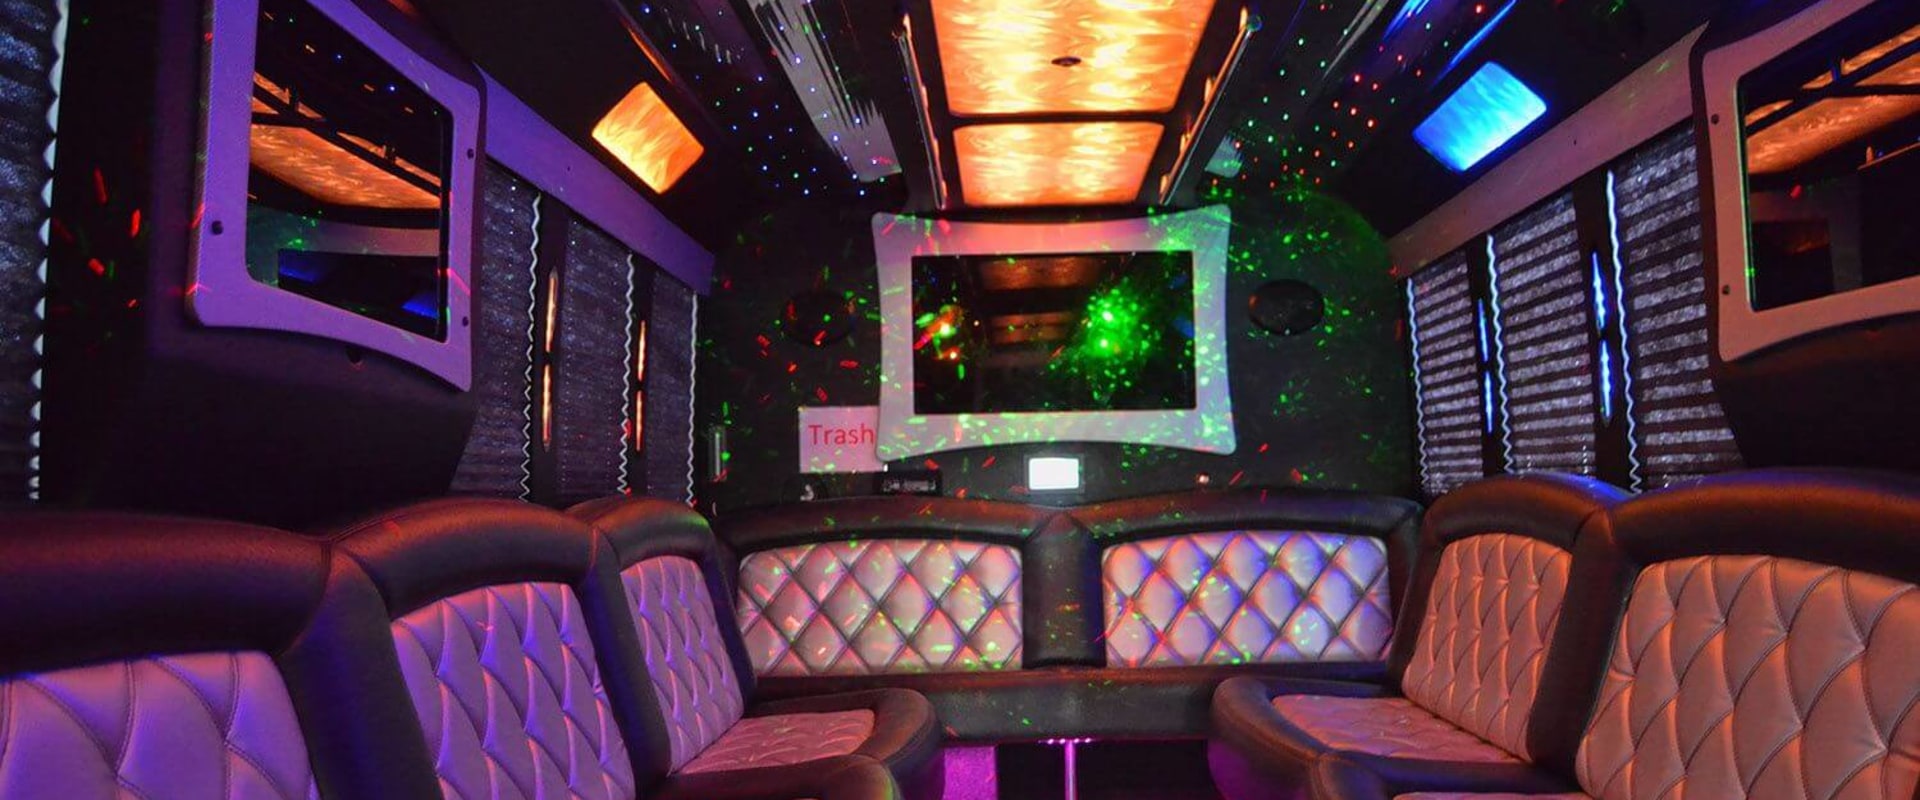 How much is a party bus rental in virginia?